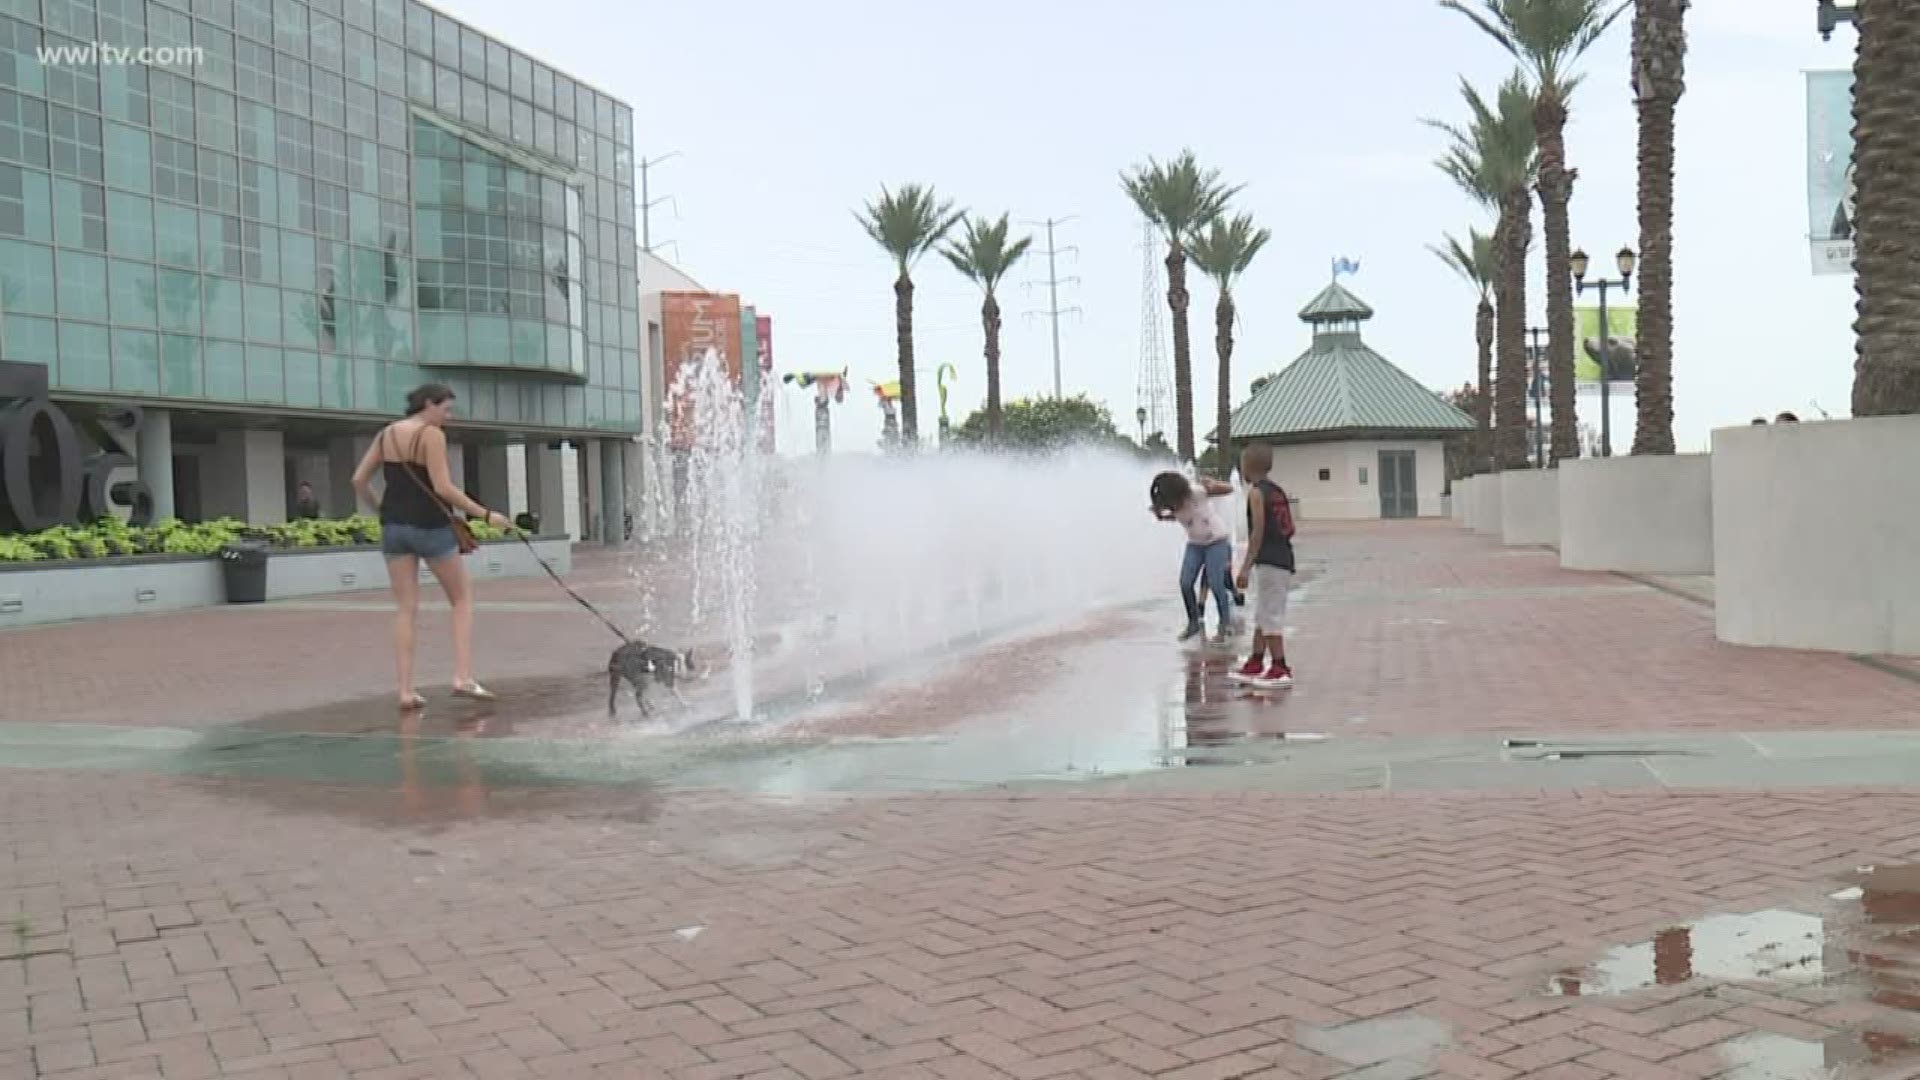 Thursday's heat is affecting a lot of people in the area and some are starting to raise concerns about heat-related incidents and deaths because of it.